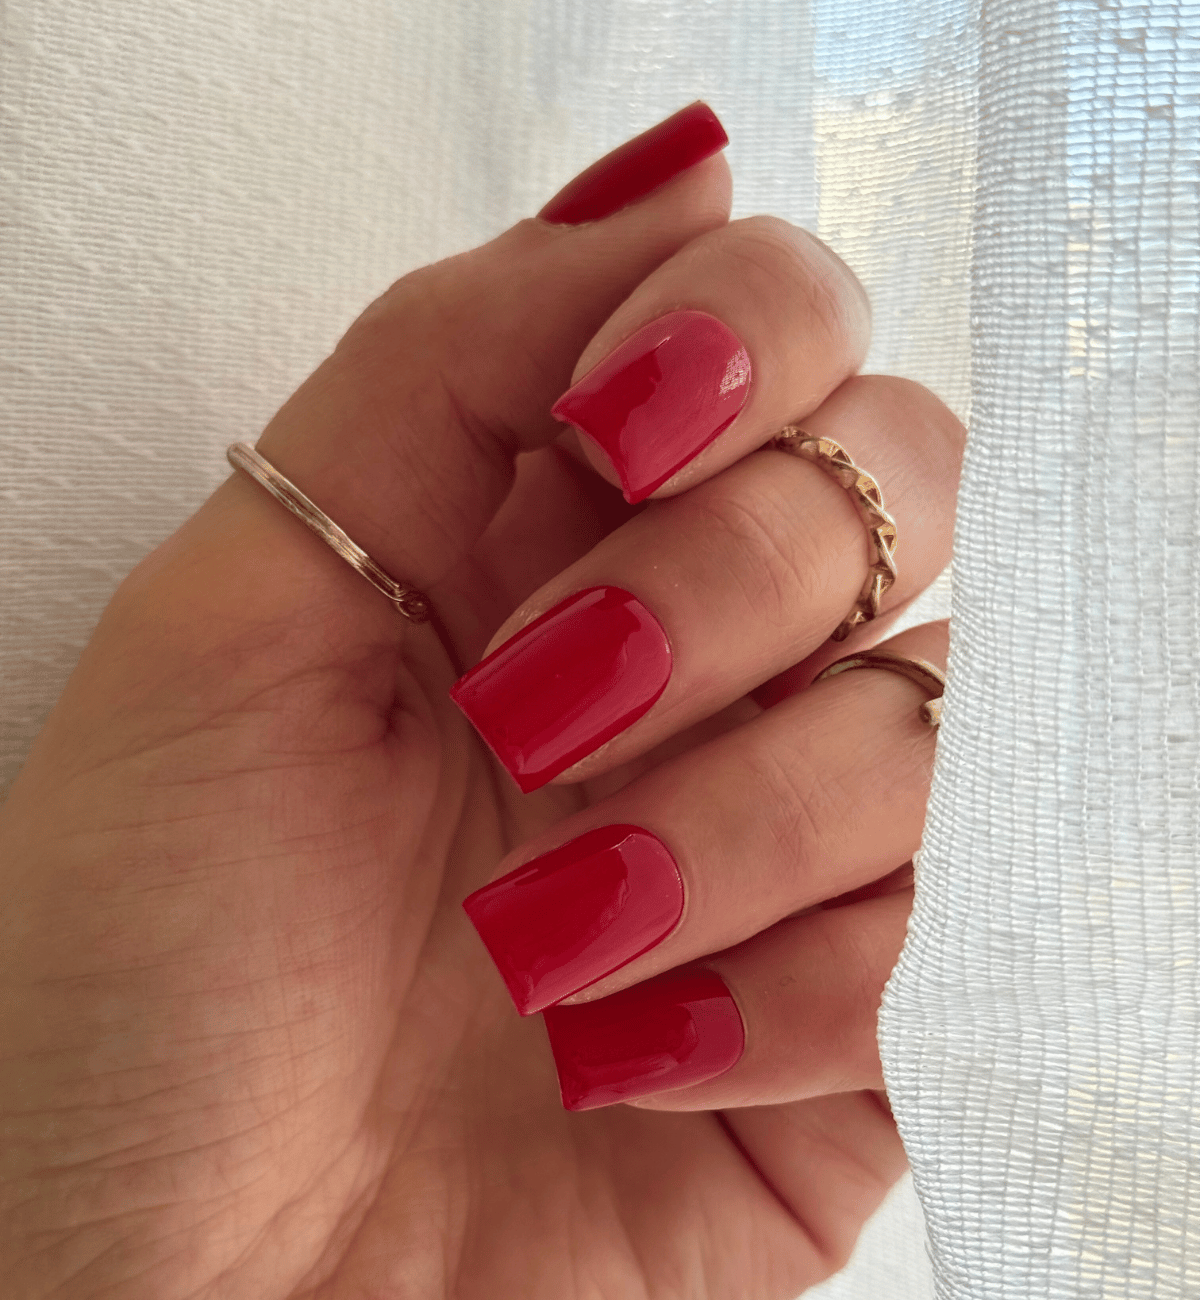 FAUX ONGLES ROUGE CARRÉ COURTS